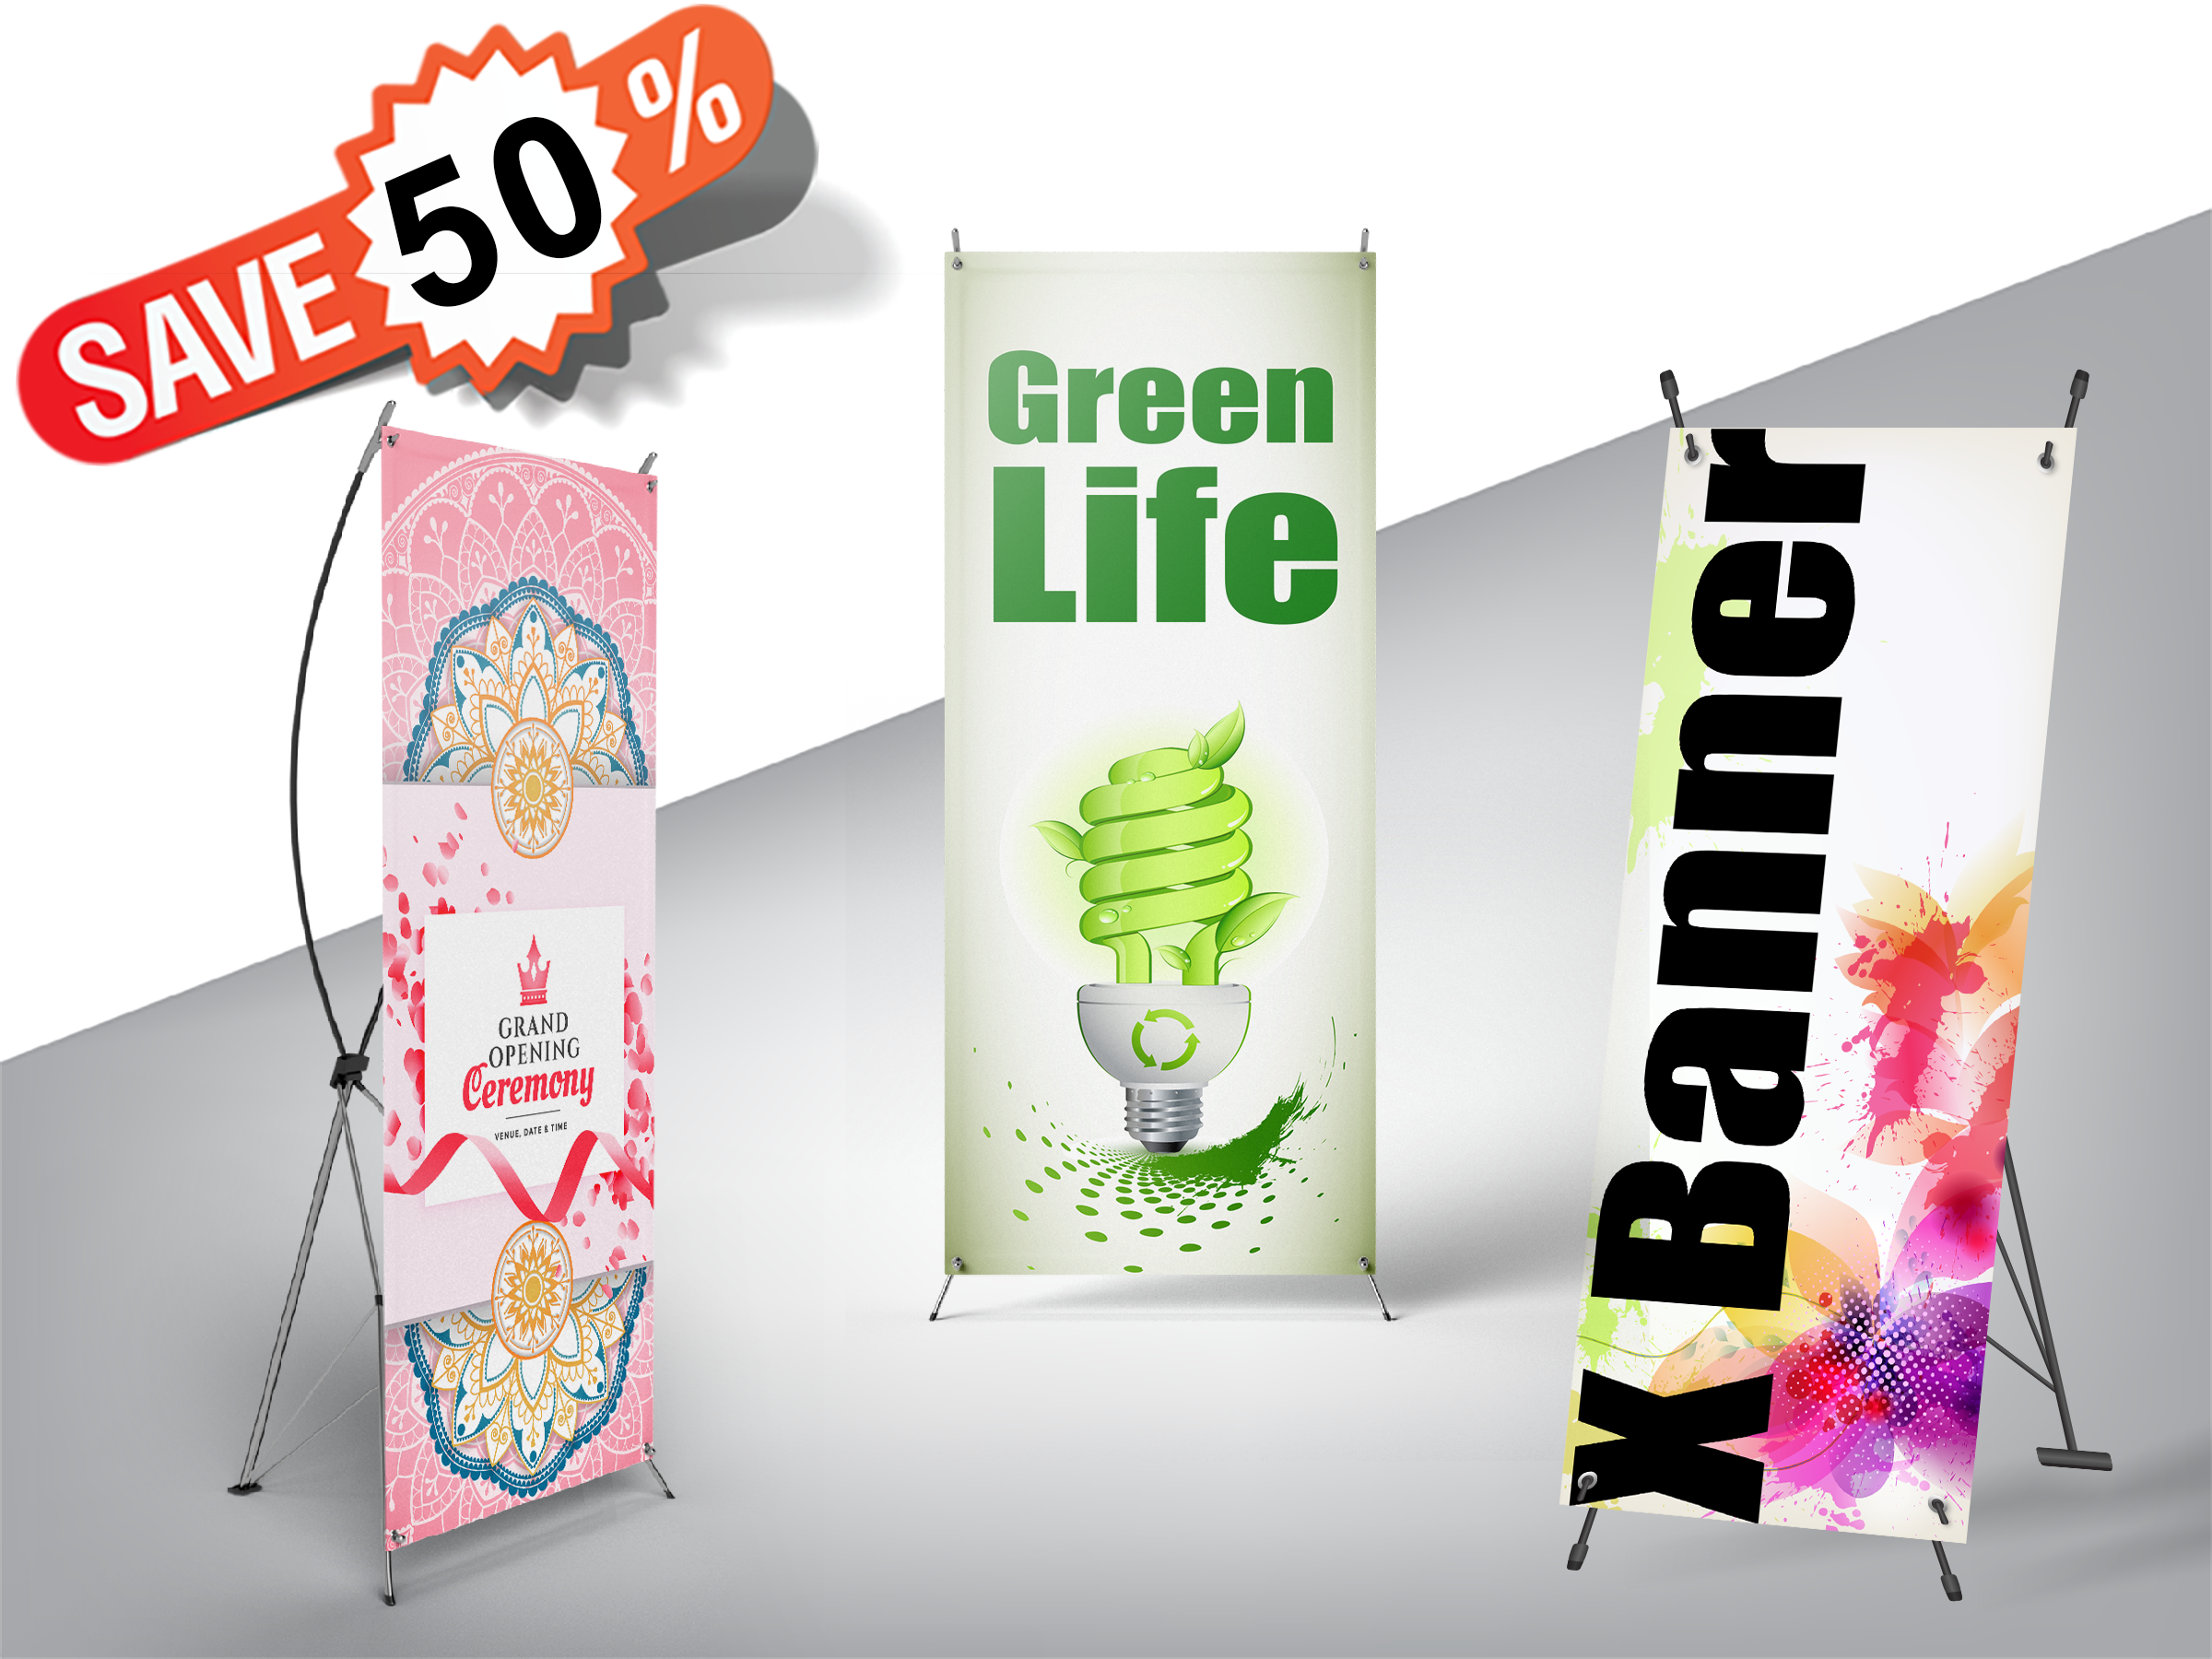 Collapsible Banner Printing